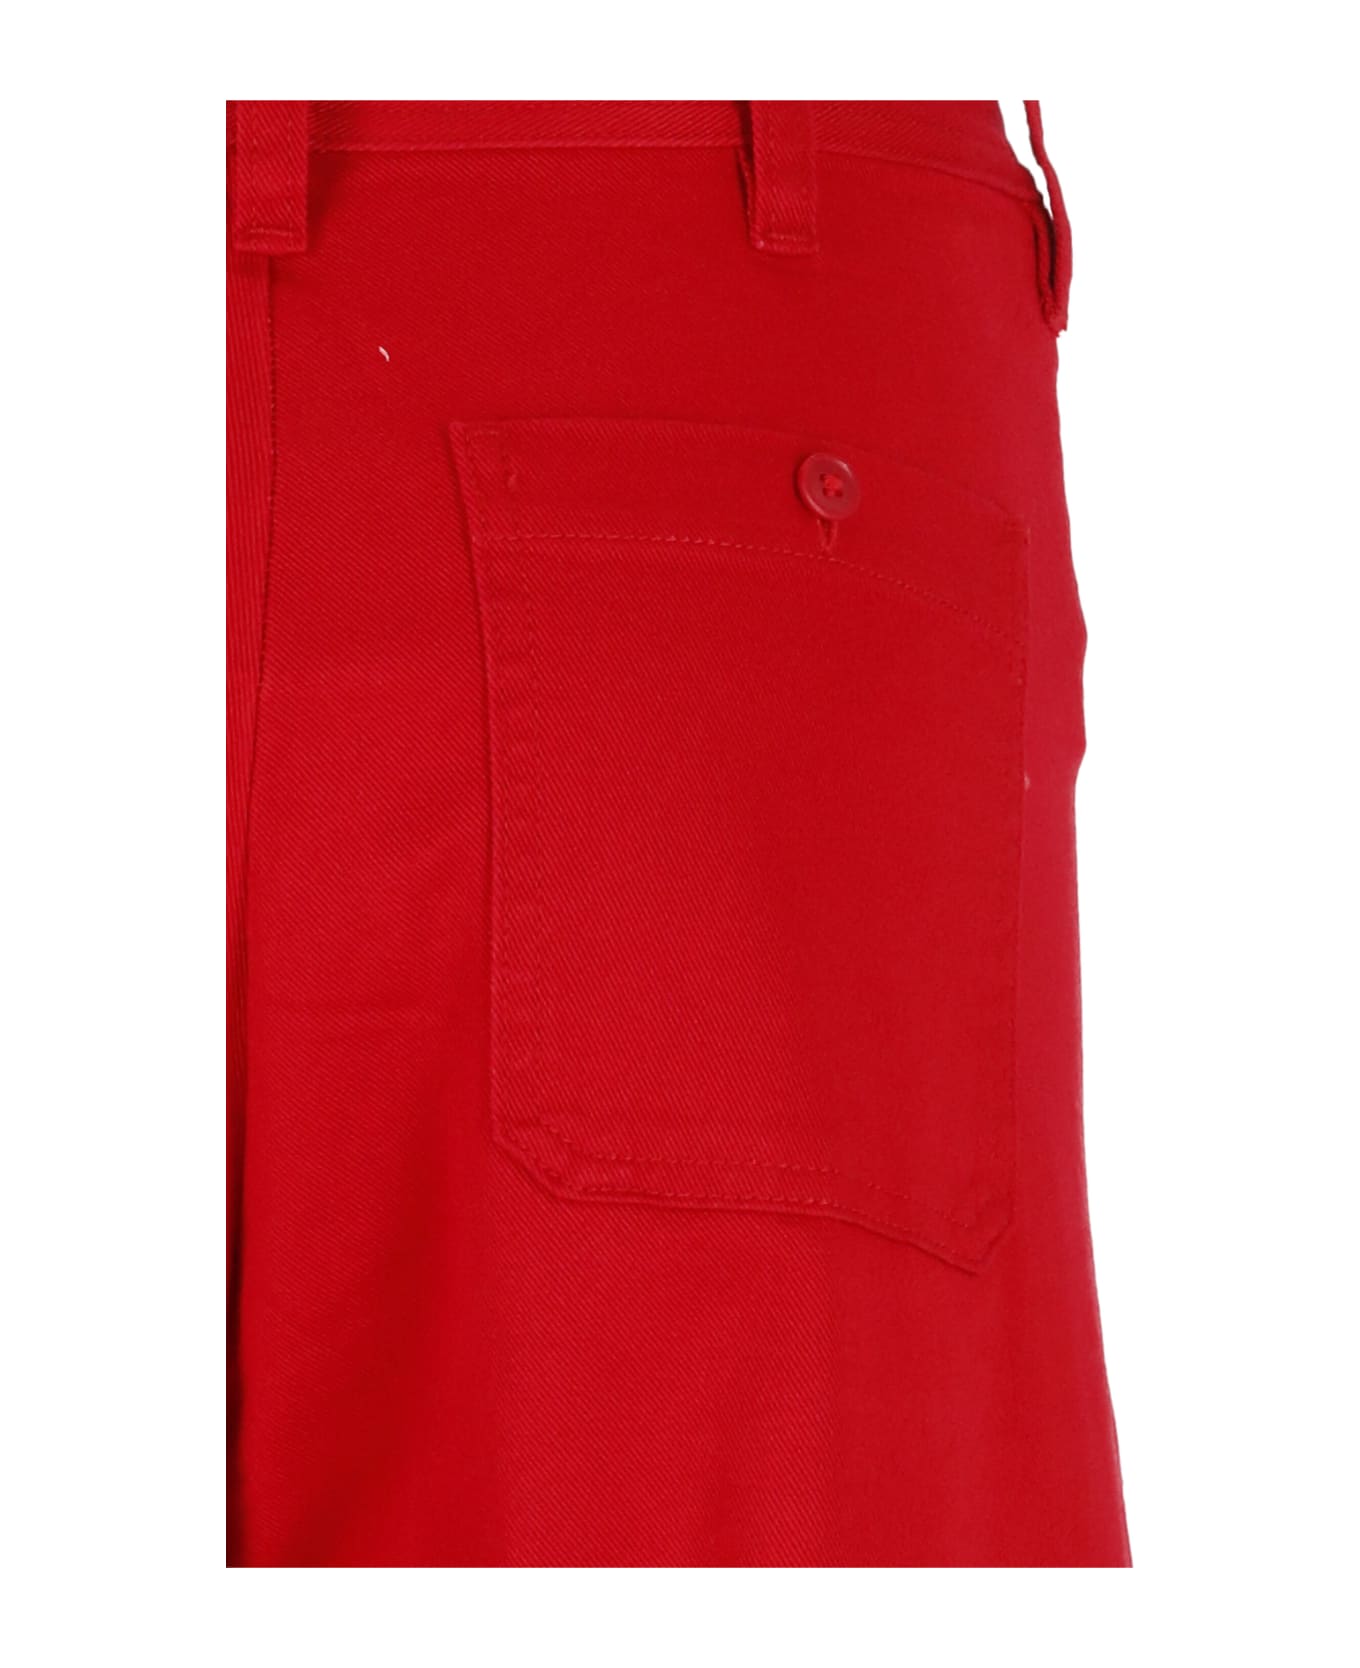 Ralph Lauren Cotton Palazzo Trousers - Red